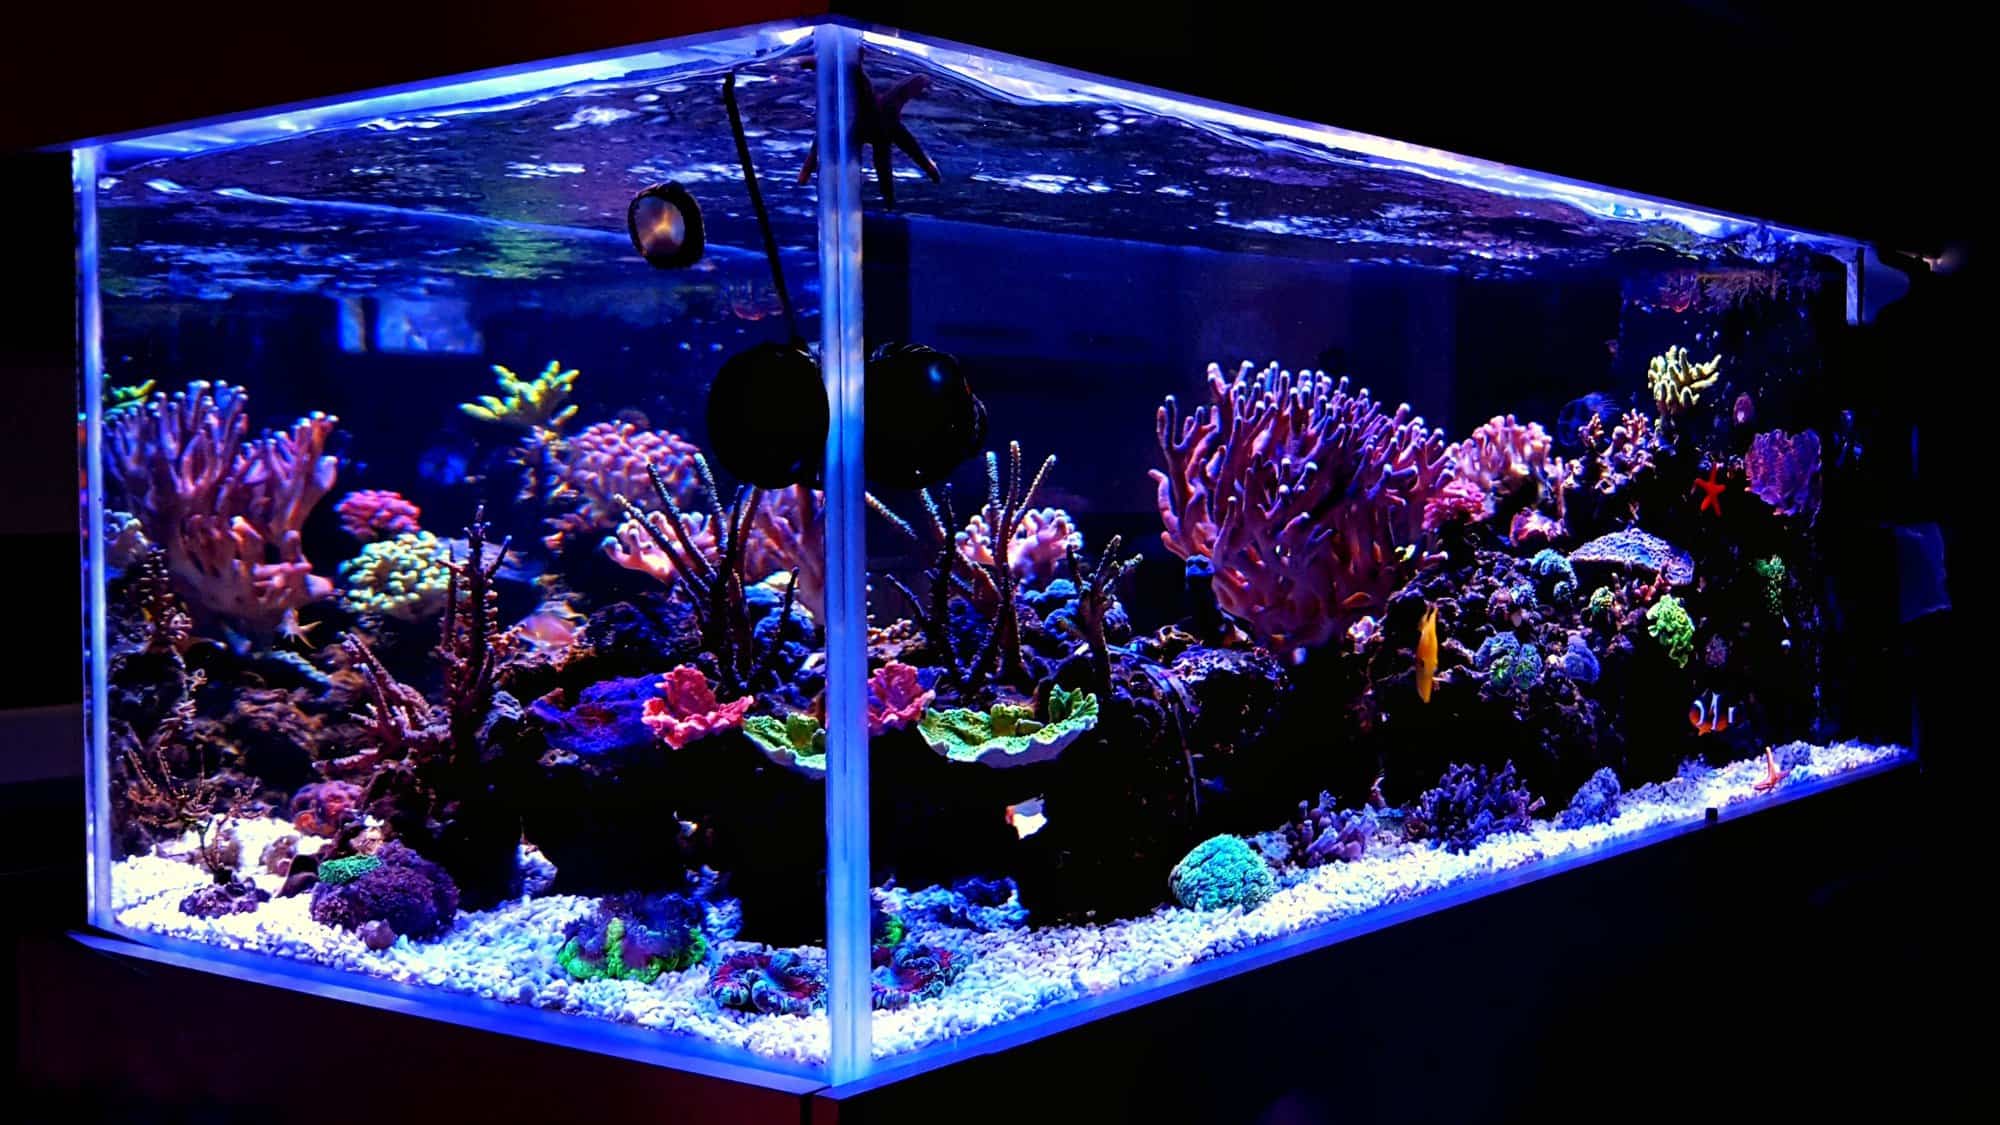 Immunitet Sund mad At regere The Kessil 160WE Review: An LED Light Great for Any Setup